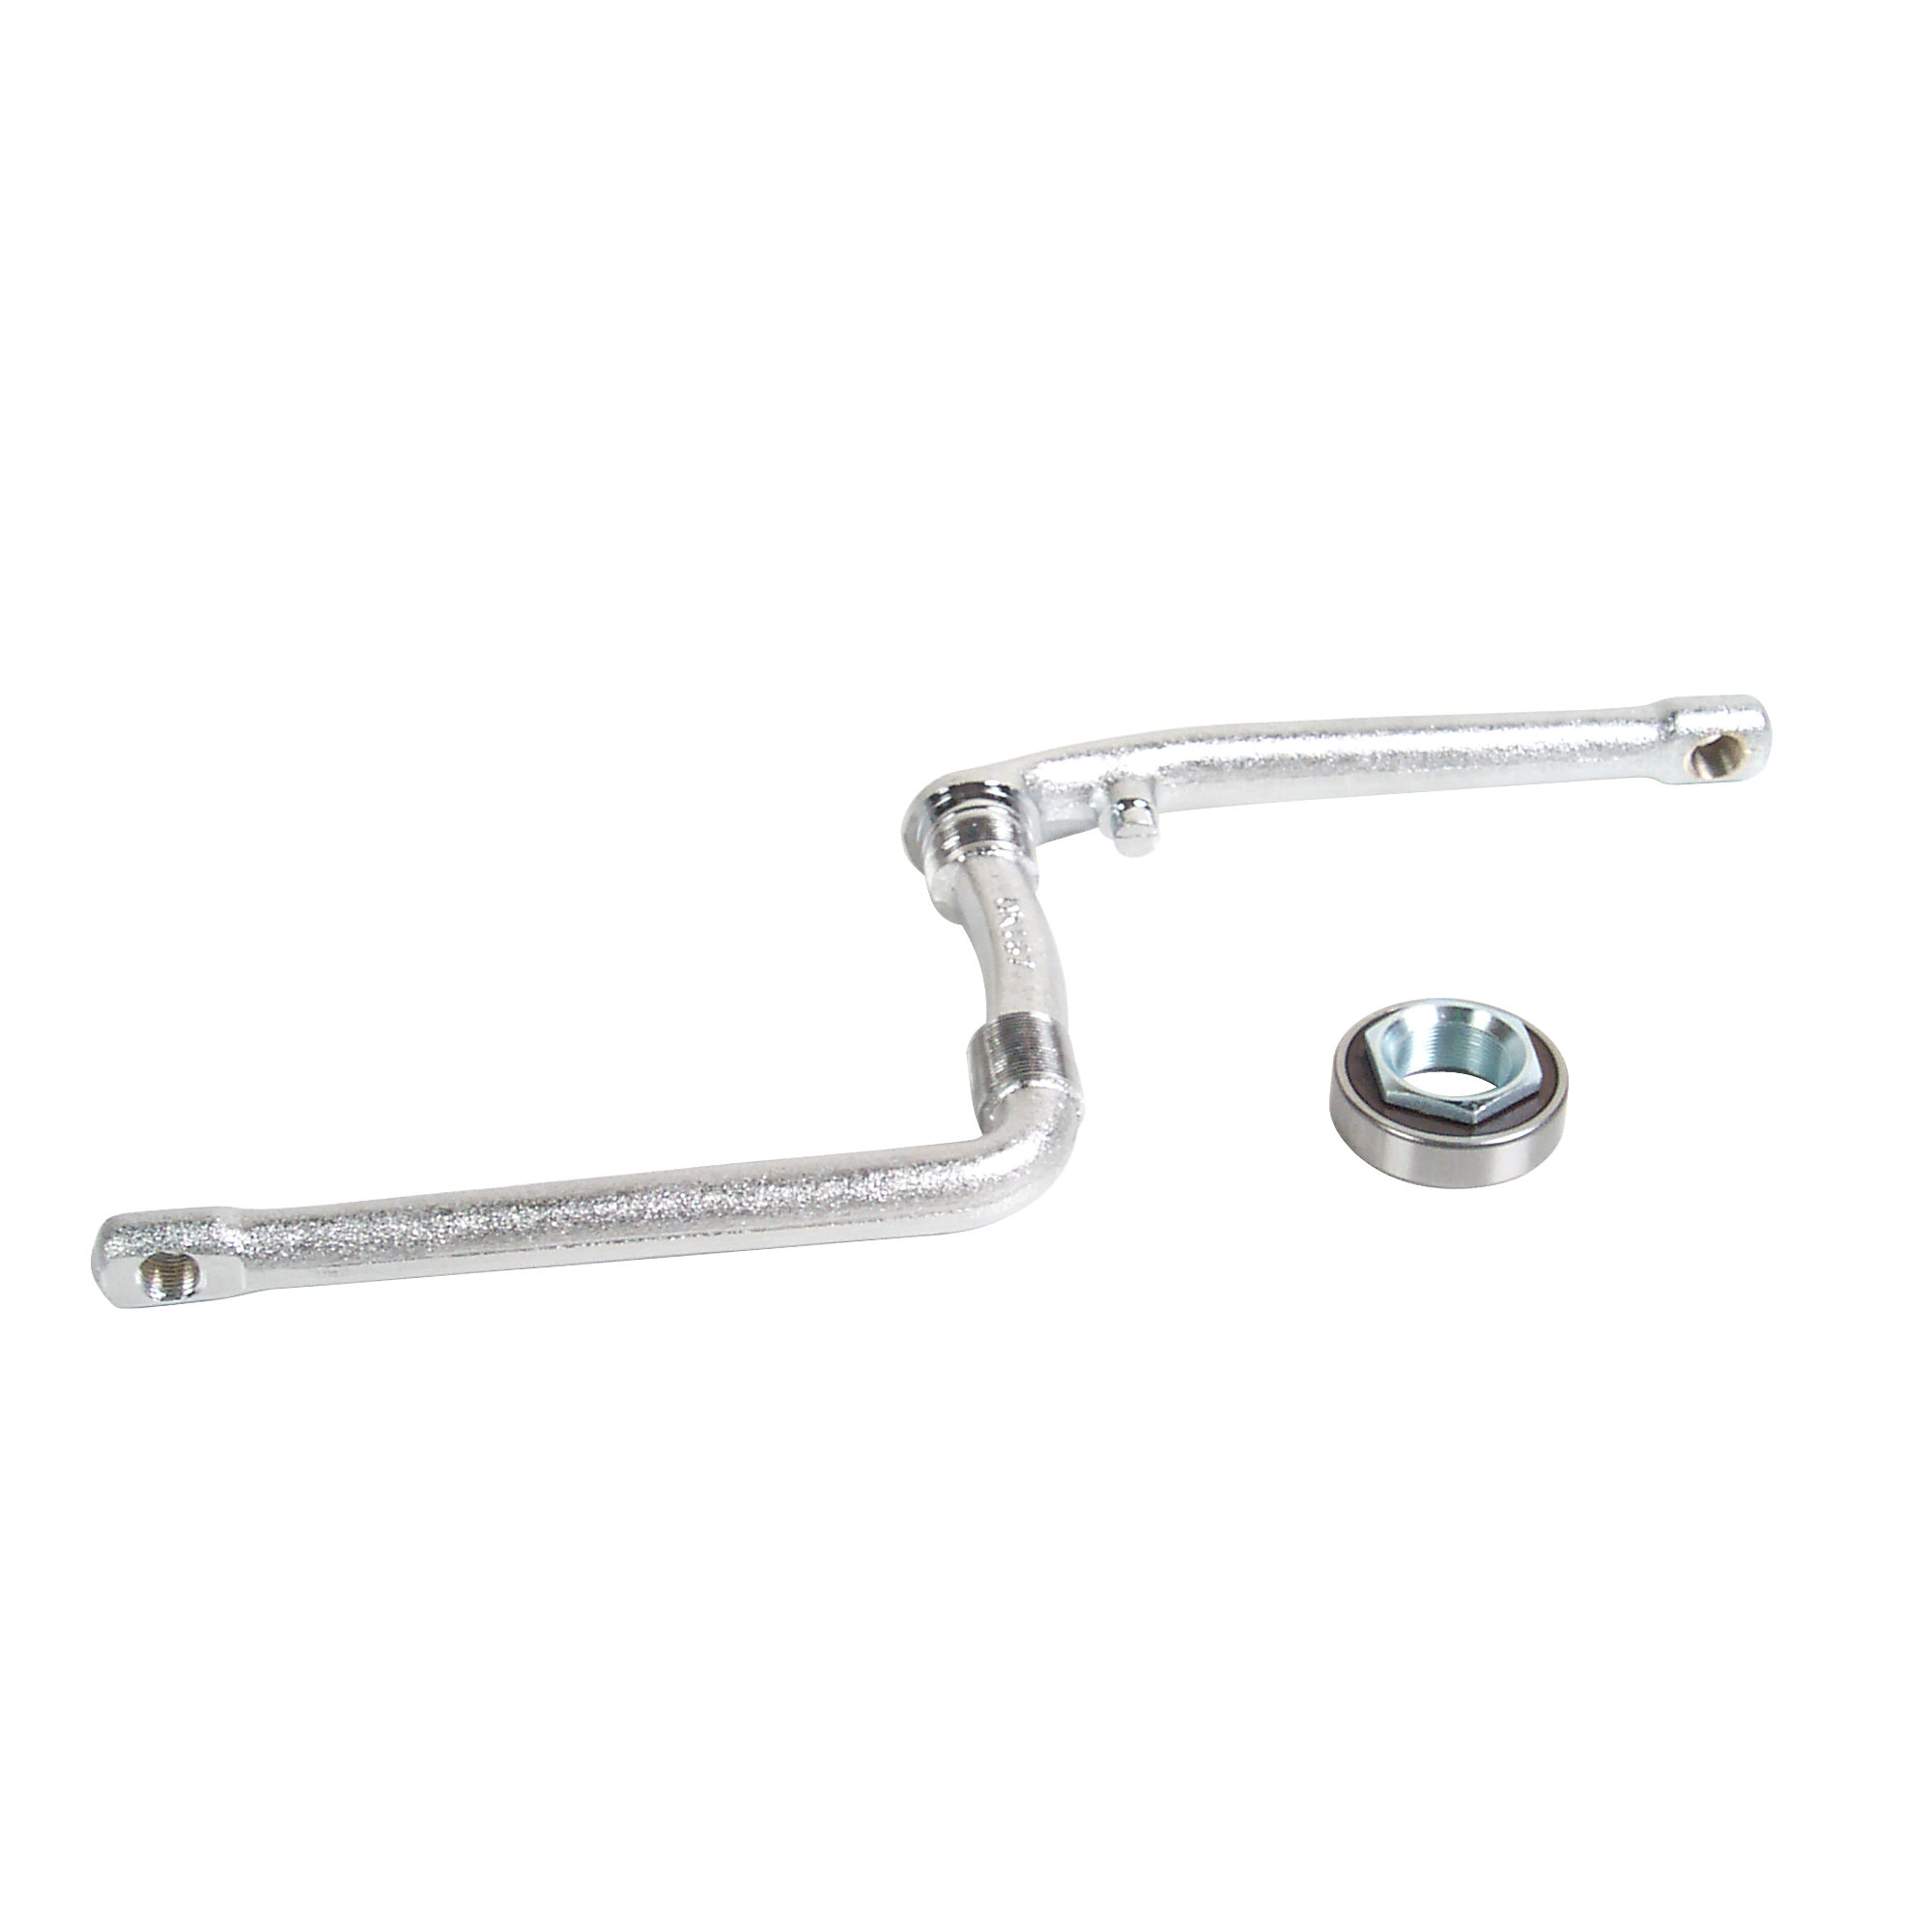 Arm Crank Assembly Kit (Arm & Right Bearing Only)